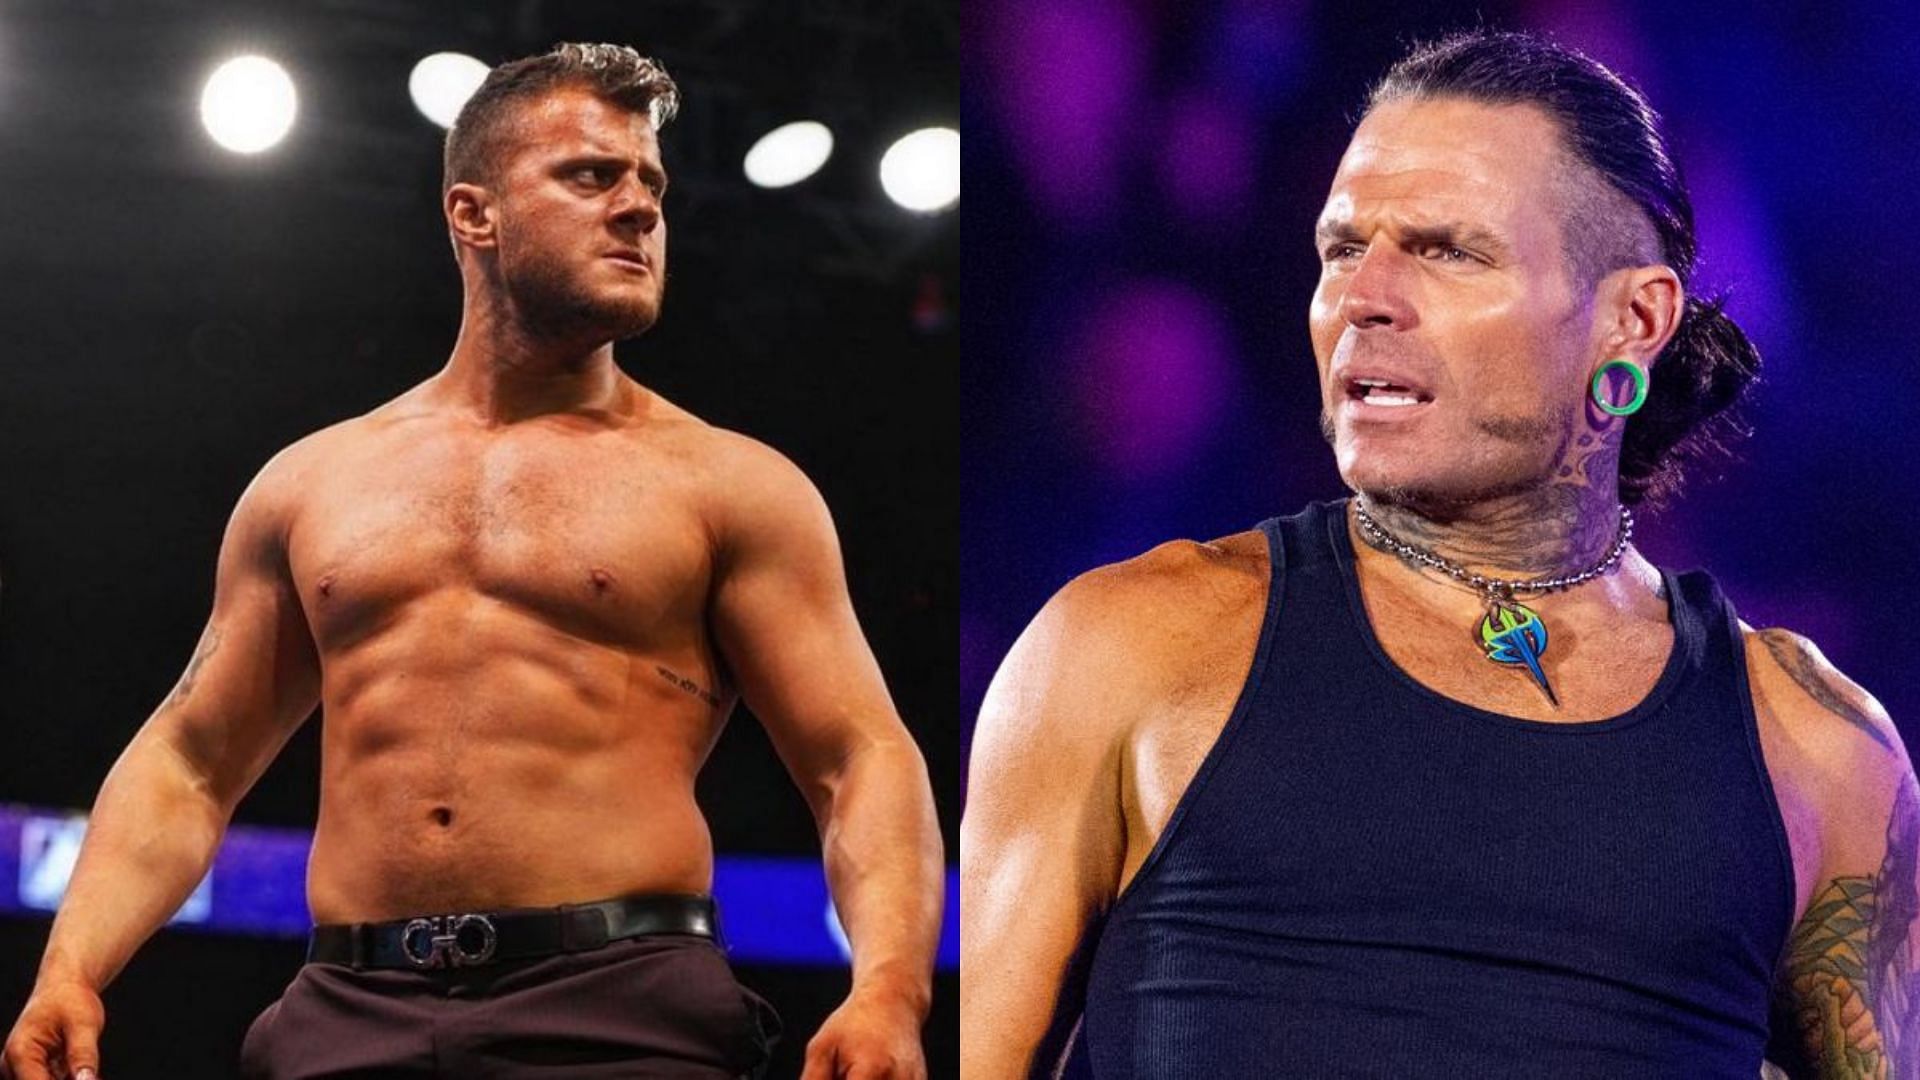 This week in AEW news features MJF, Jeff Hardy, and more